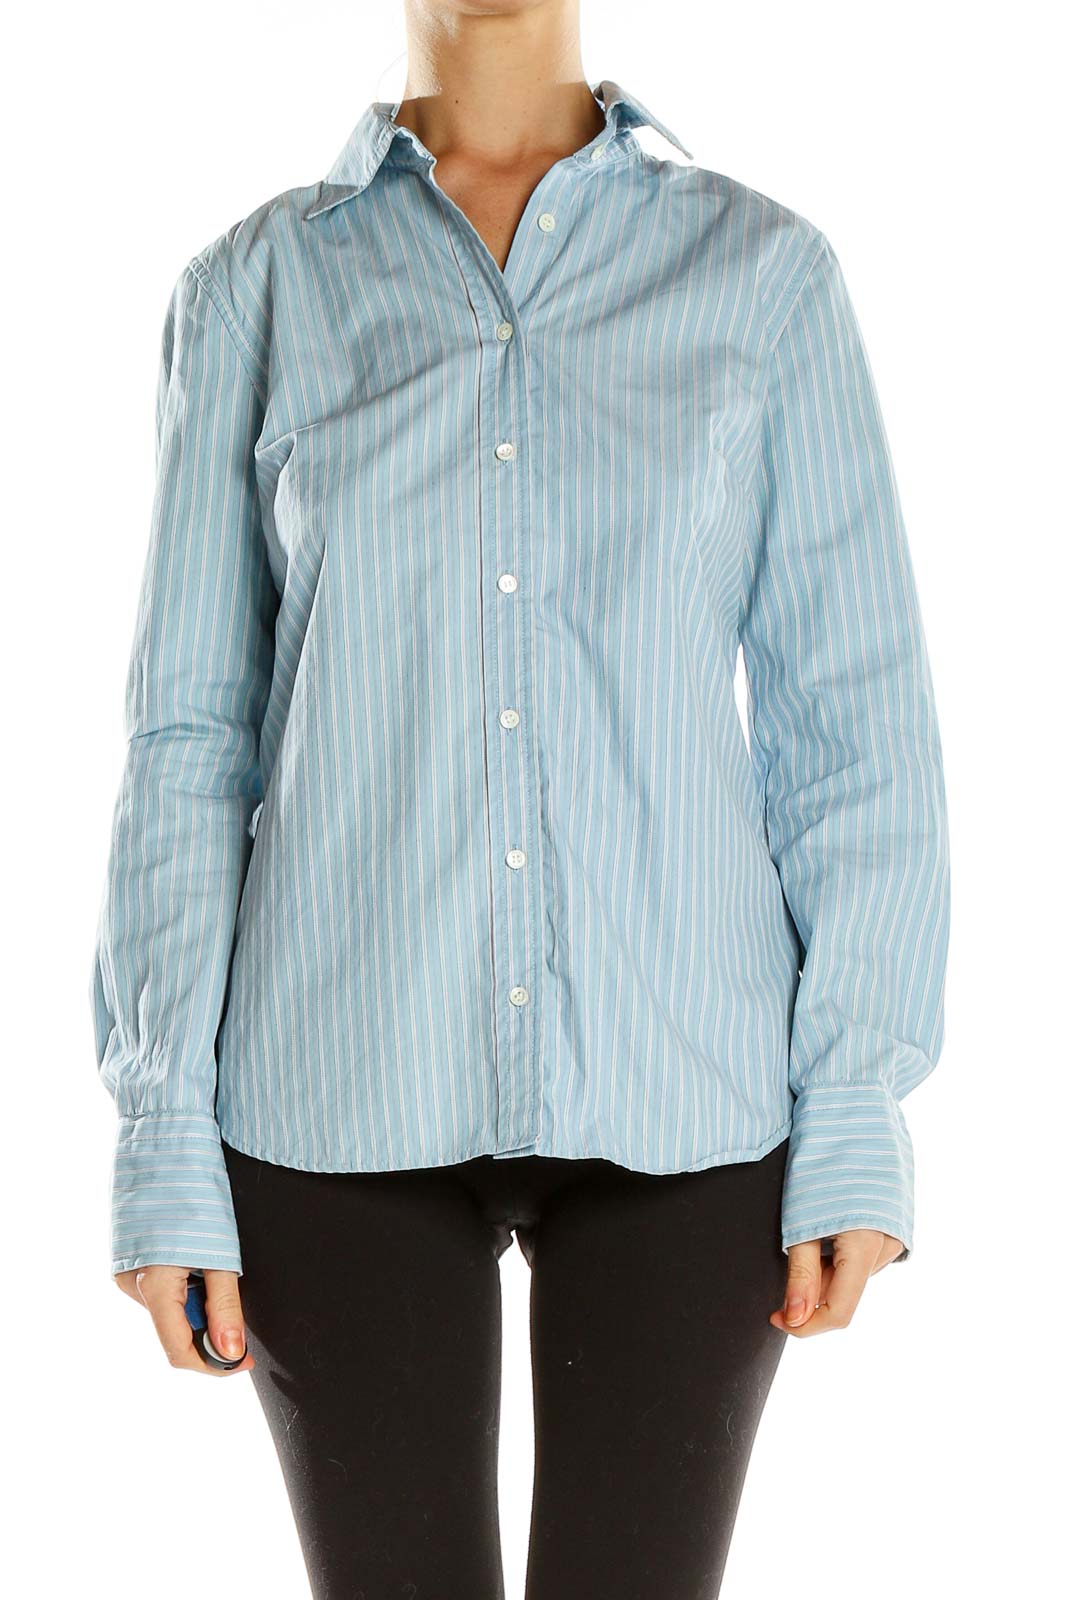 Blue Striped Formal Top Front